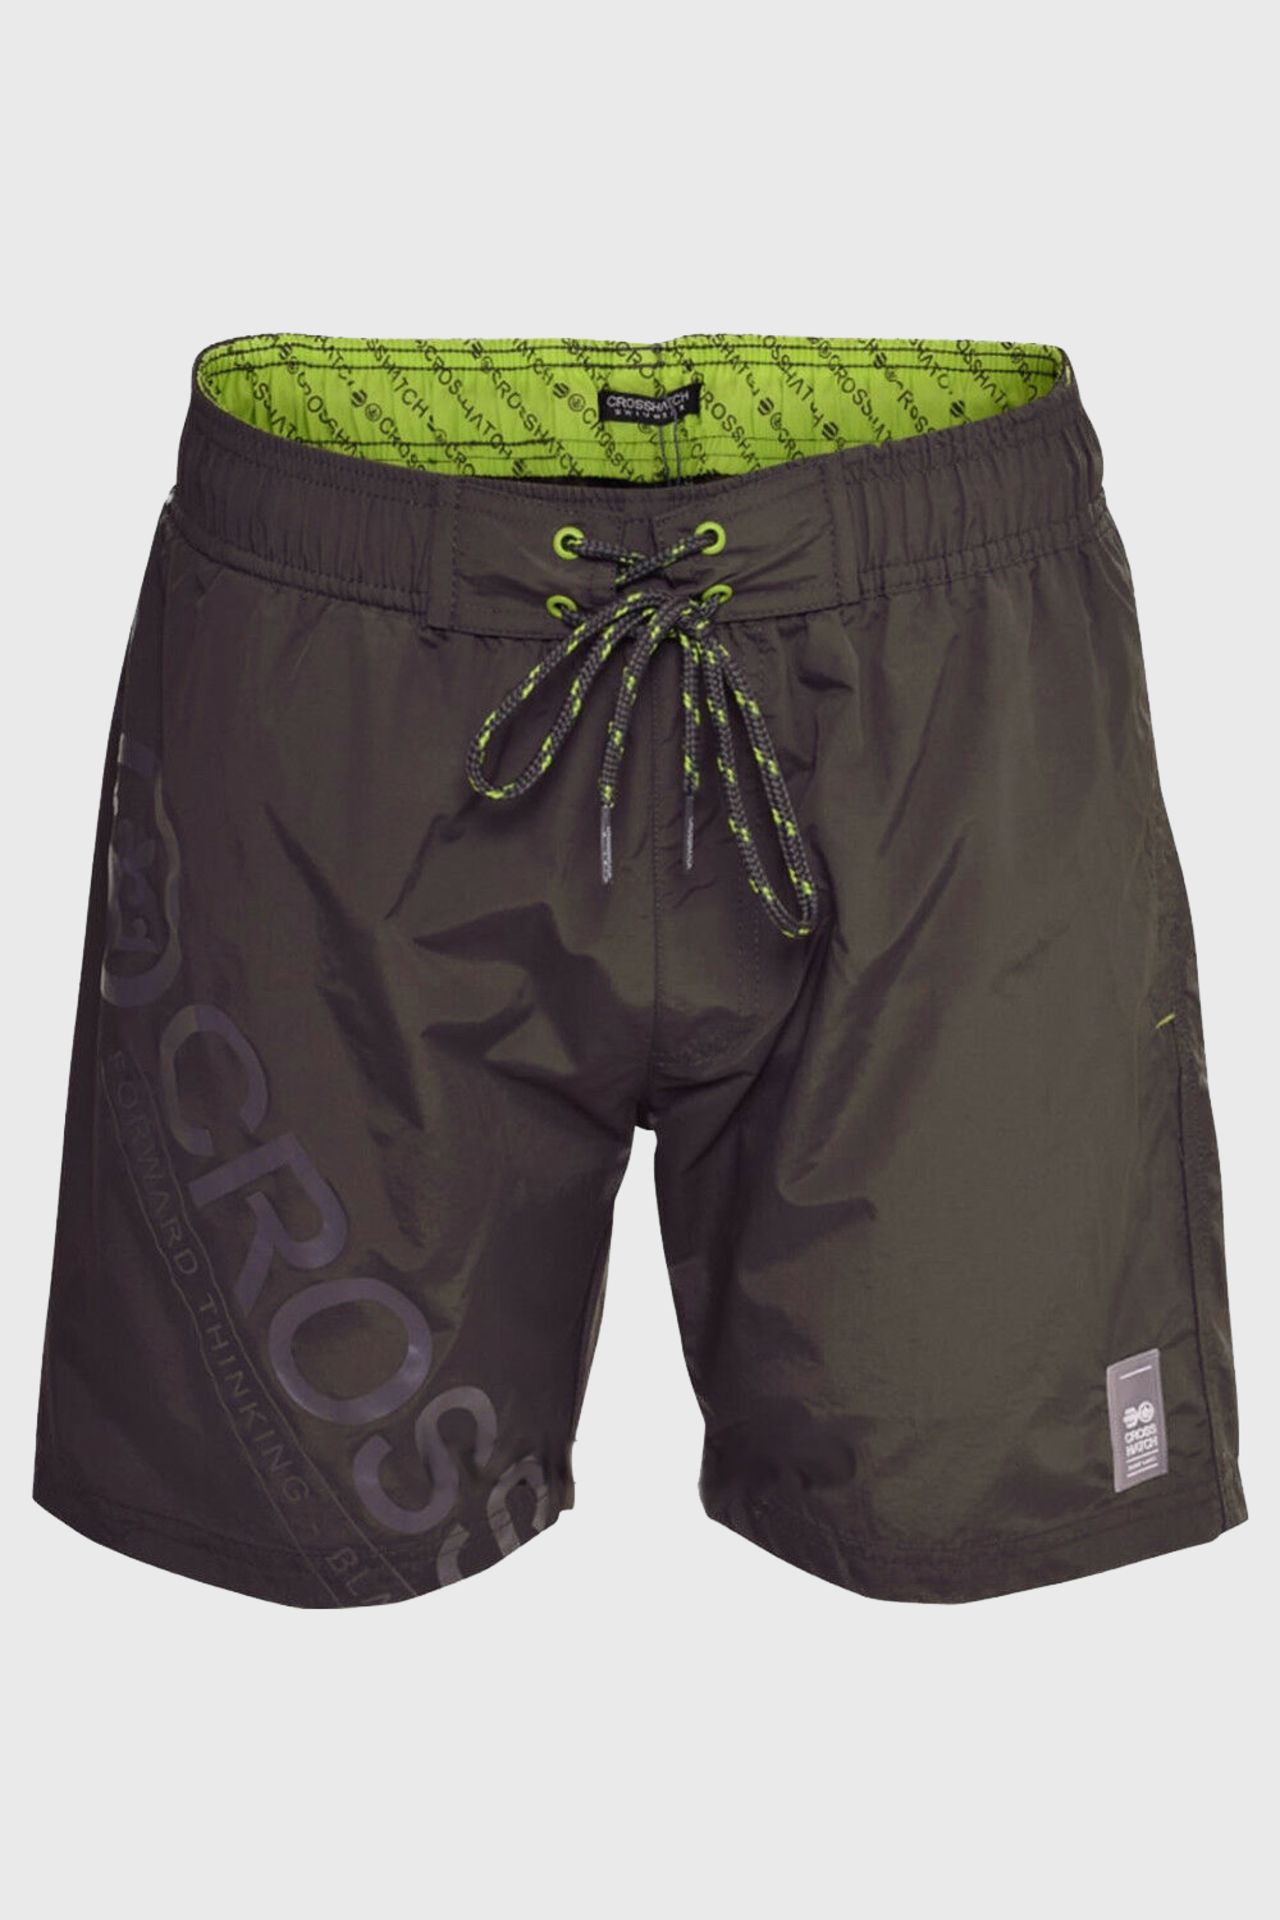 24 X BRAND NEW CROSSHATCH MESH LINED SWIM SHORTS WITH LOGO - ALL IN GREY - RRP £ 24.99 EACH ALL IN